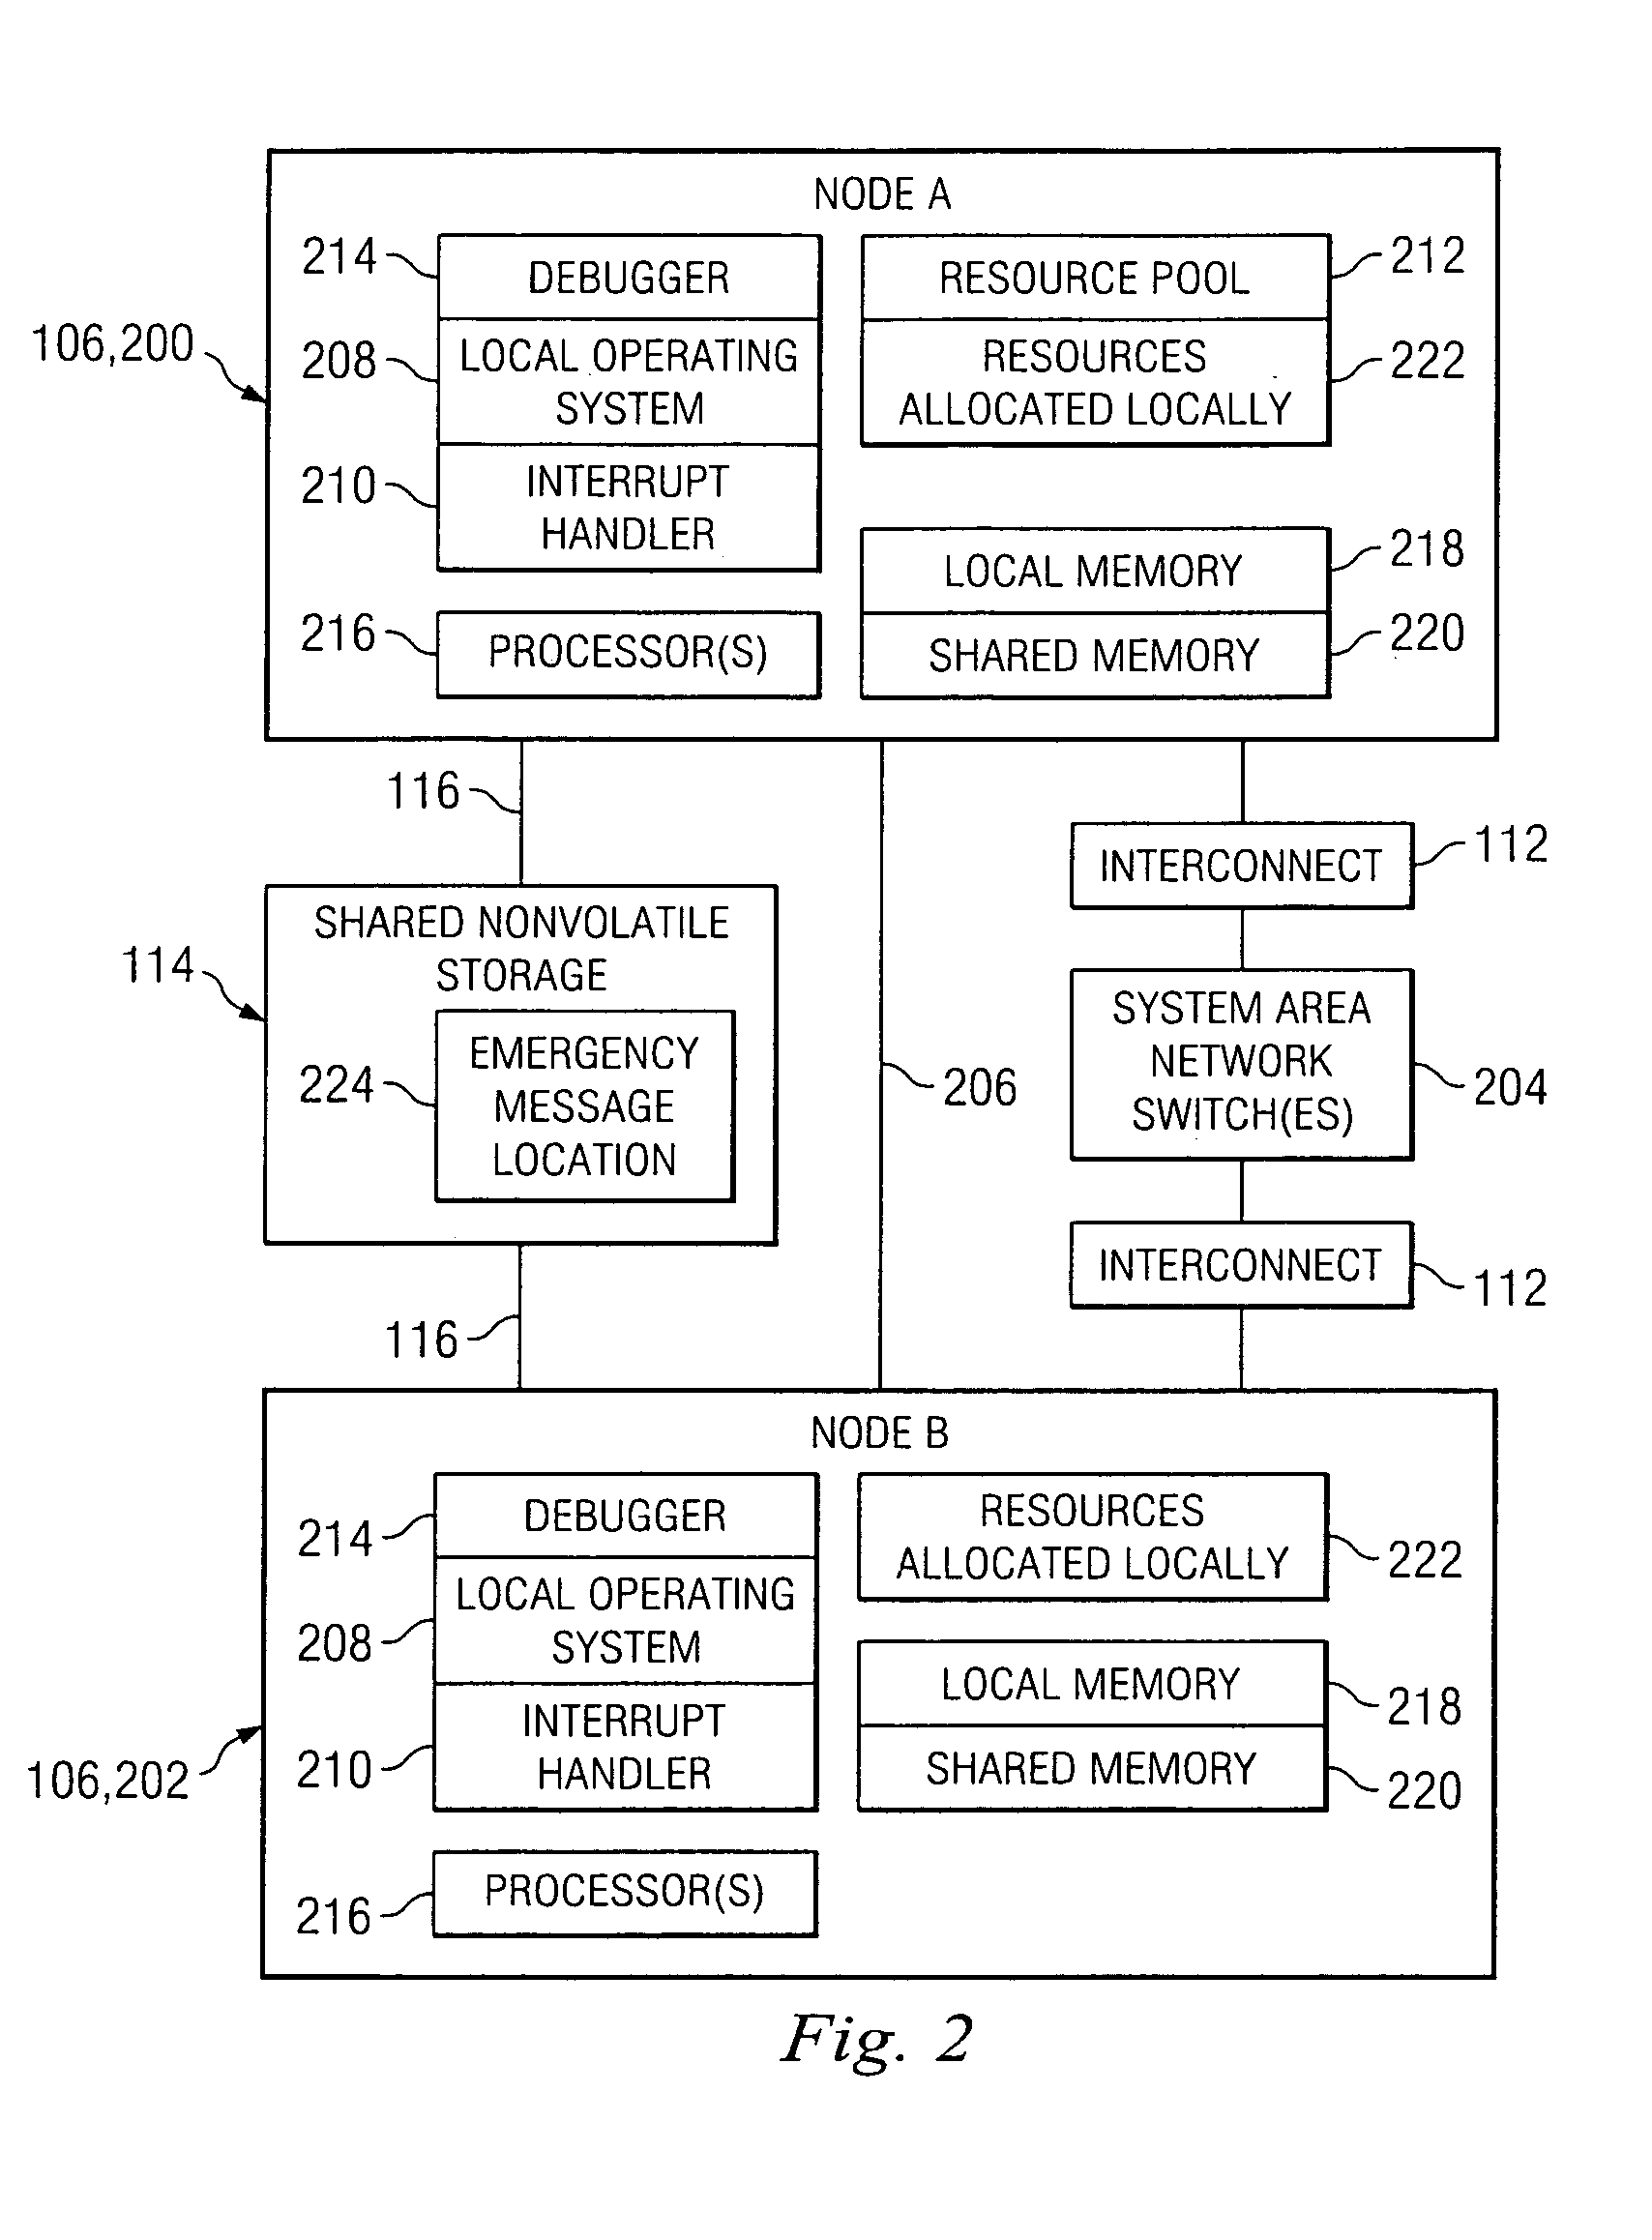 Method for detecting and resolving a partition condition in a cluster